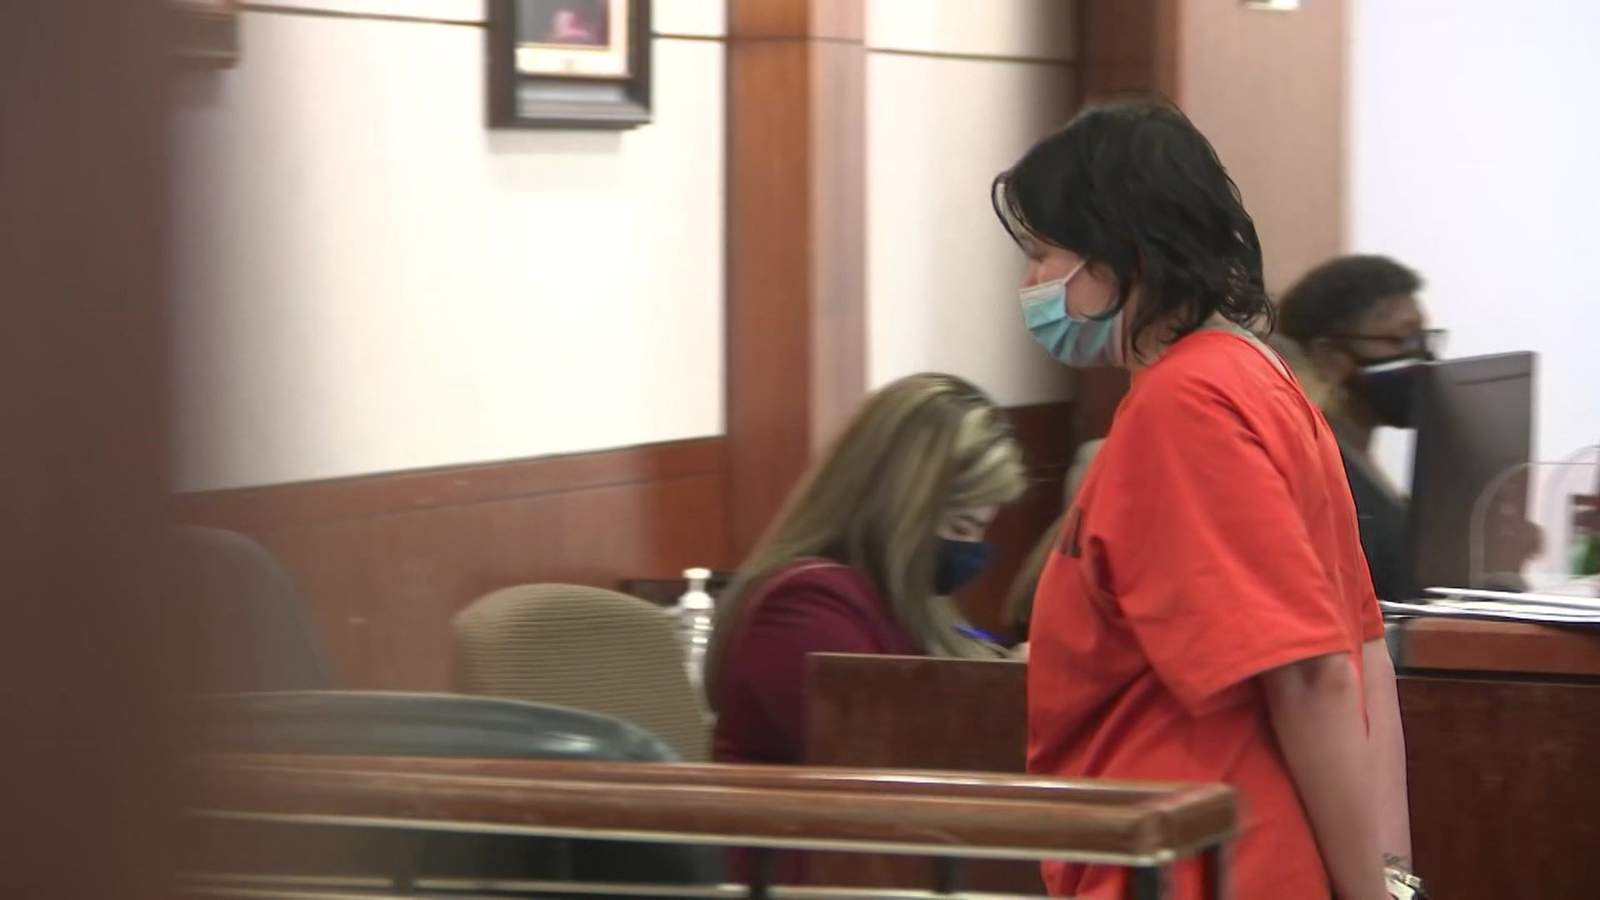 Bond set at $750K for woman accused of giving son fatal drug concoction